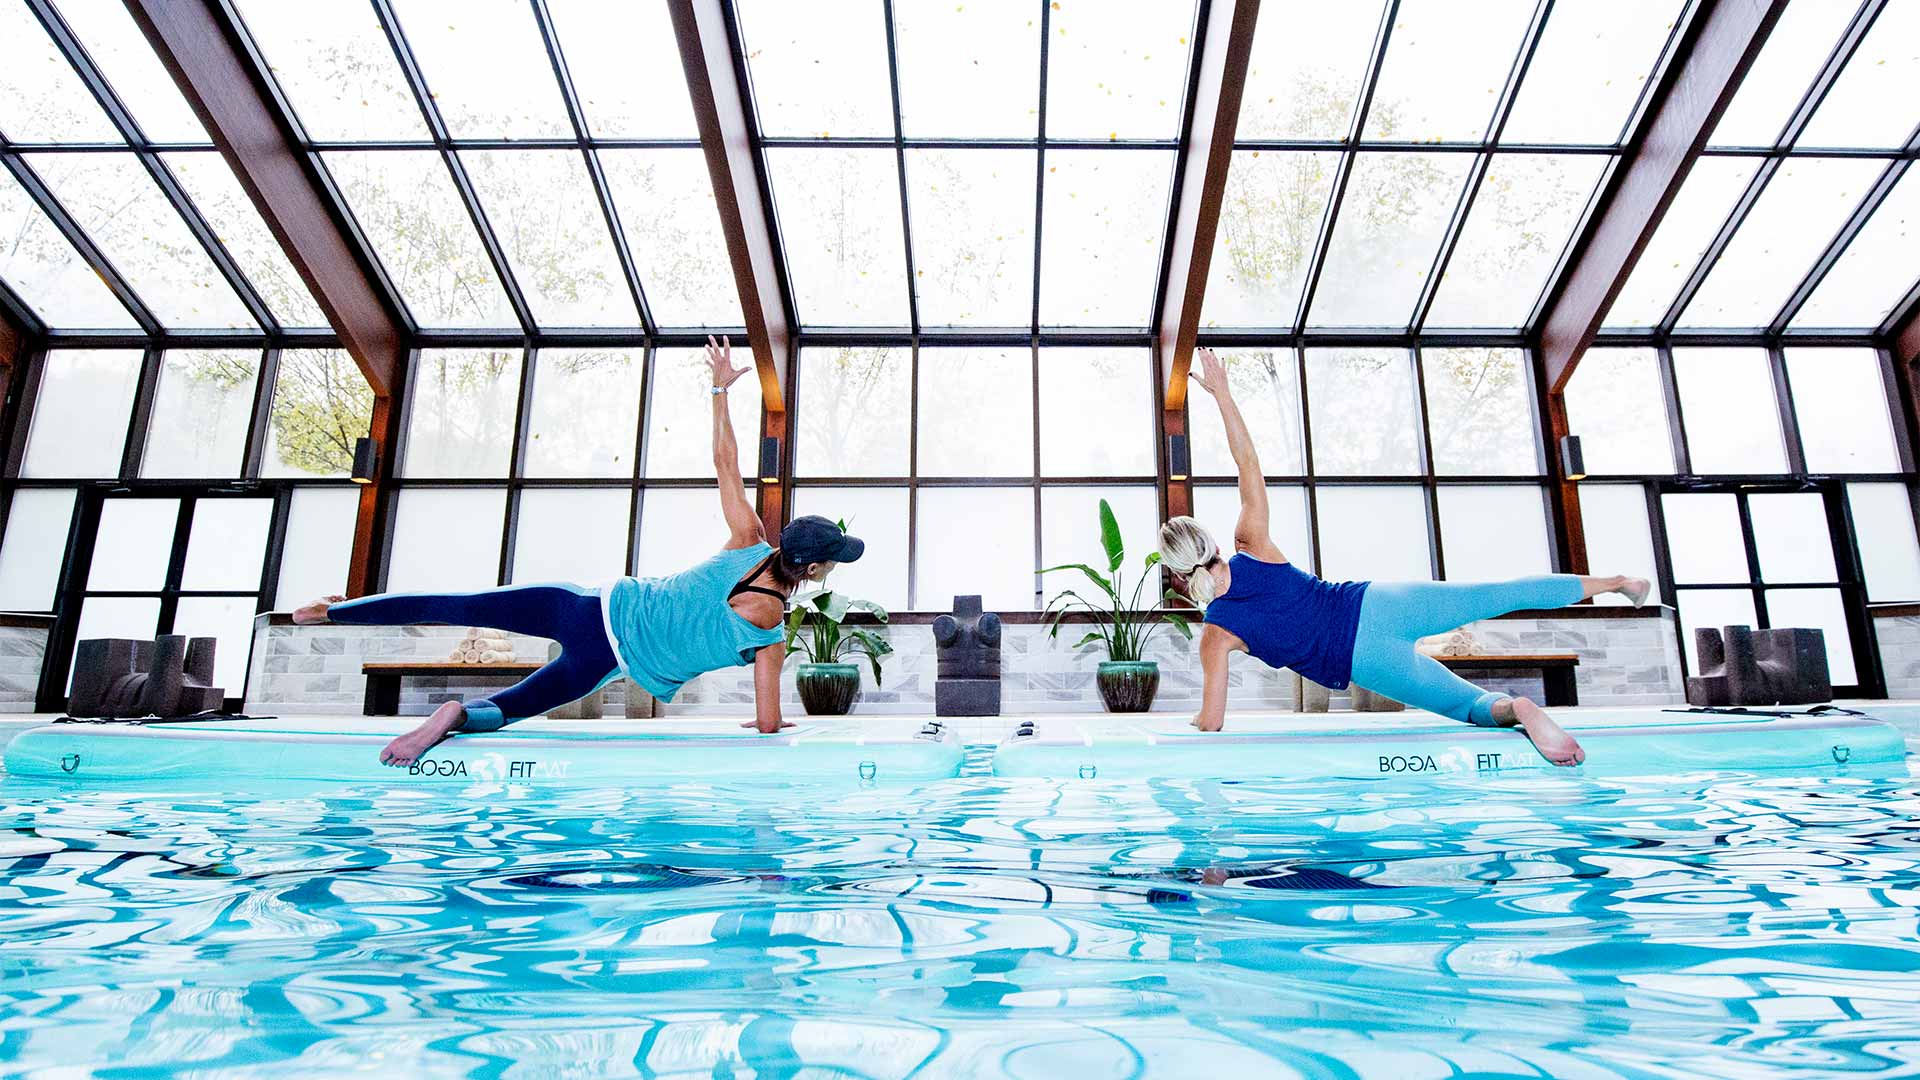 two people is blue workout gear are doing side planks at the edge of a pool